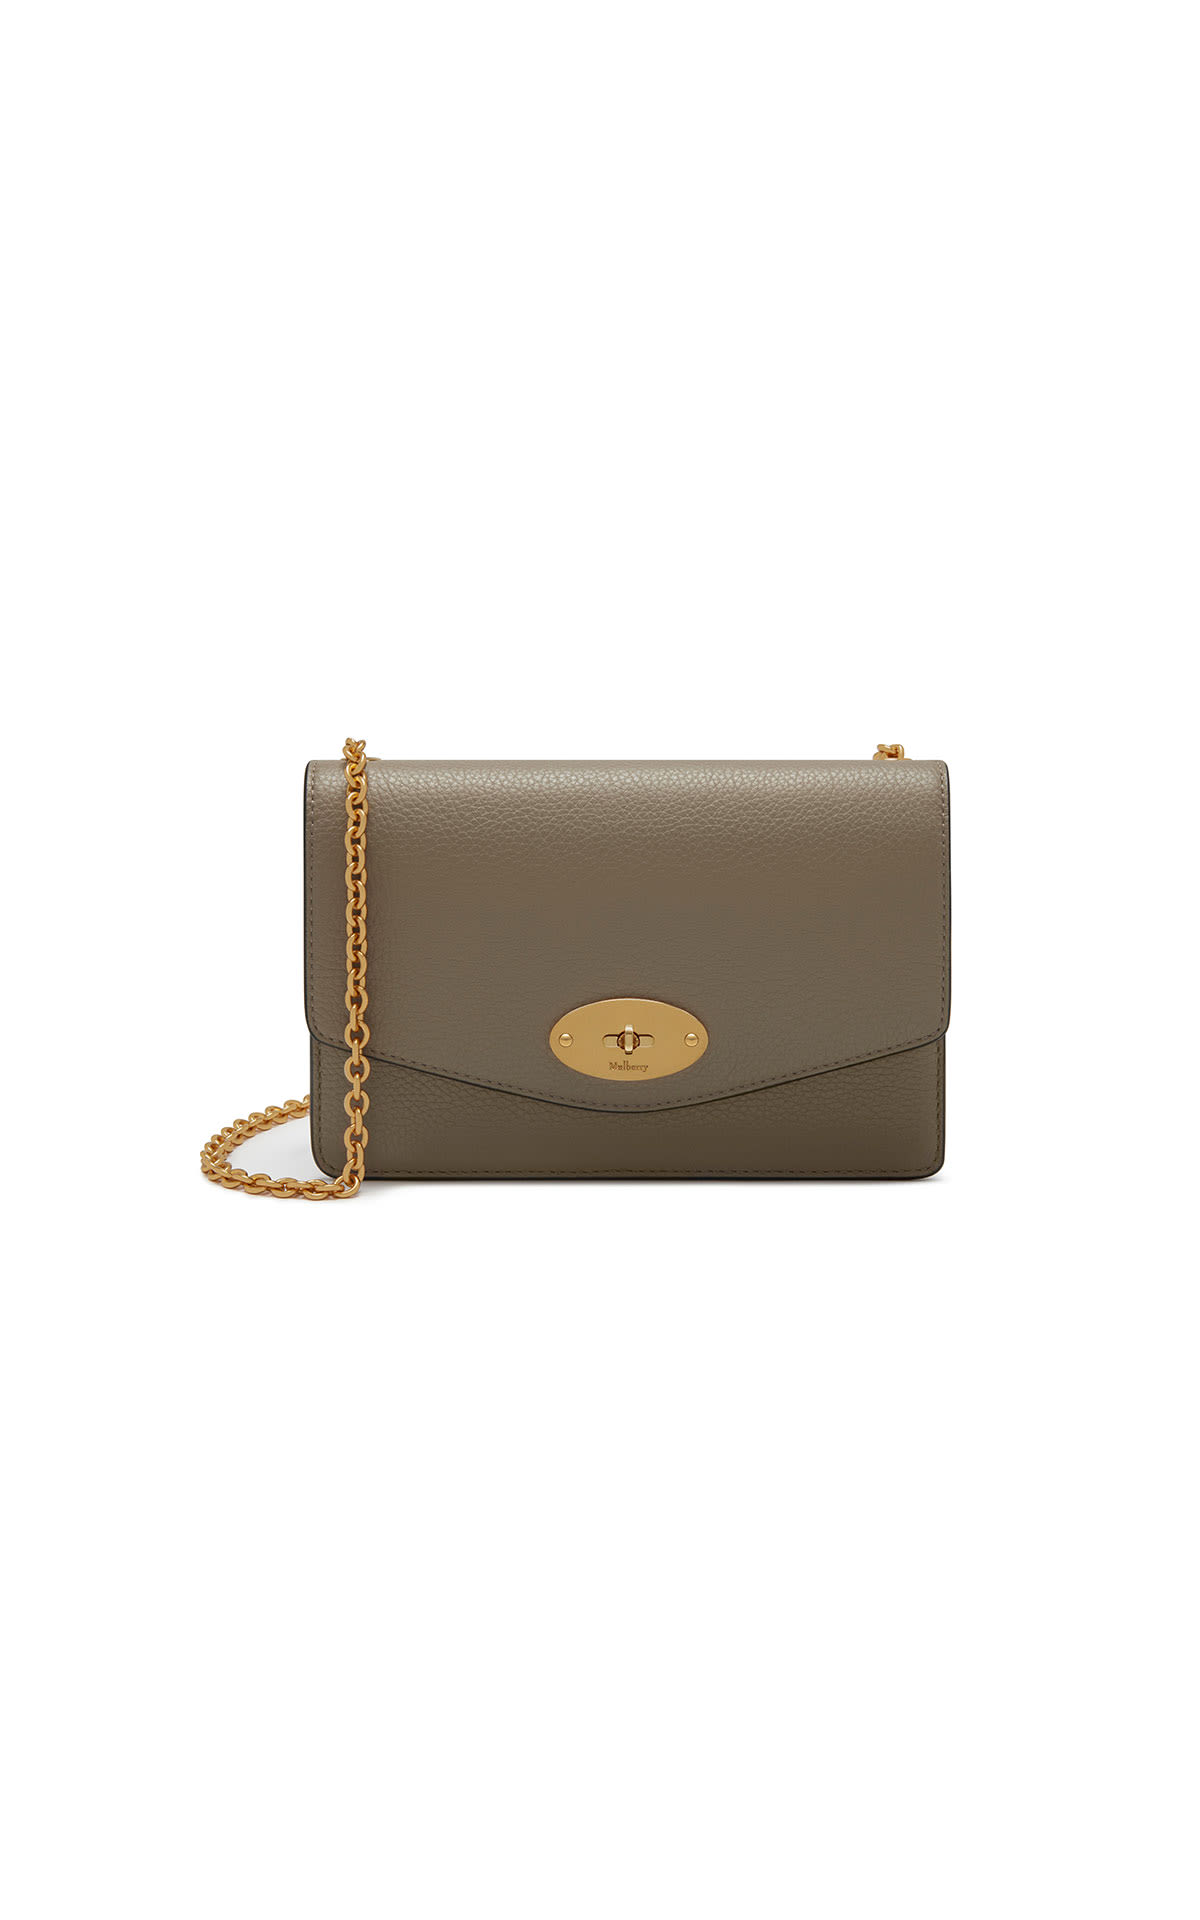 Mulberry Small darley from Bicester Village